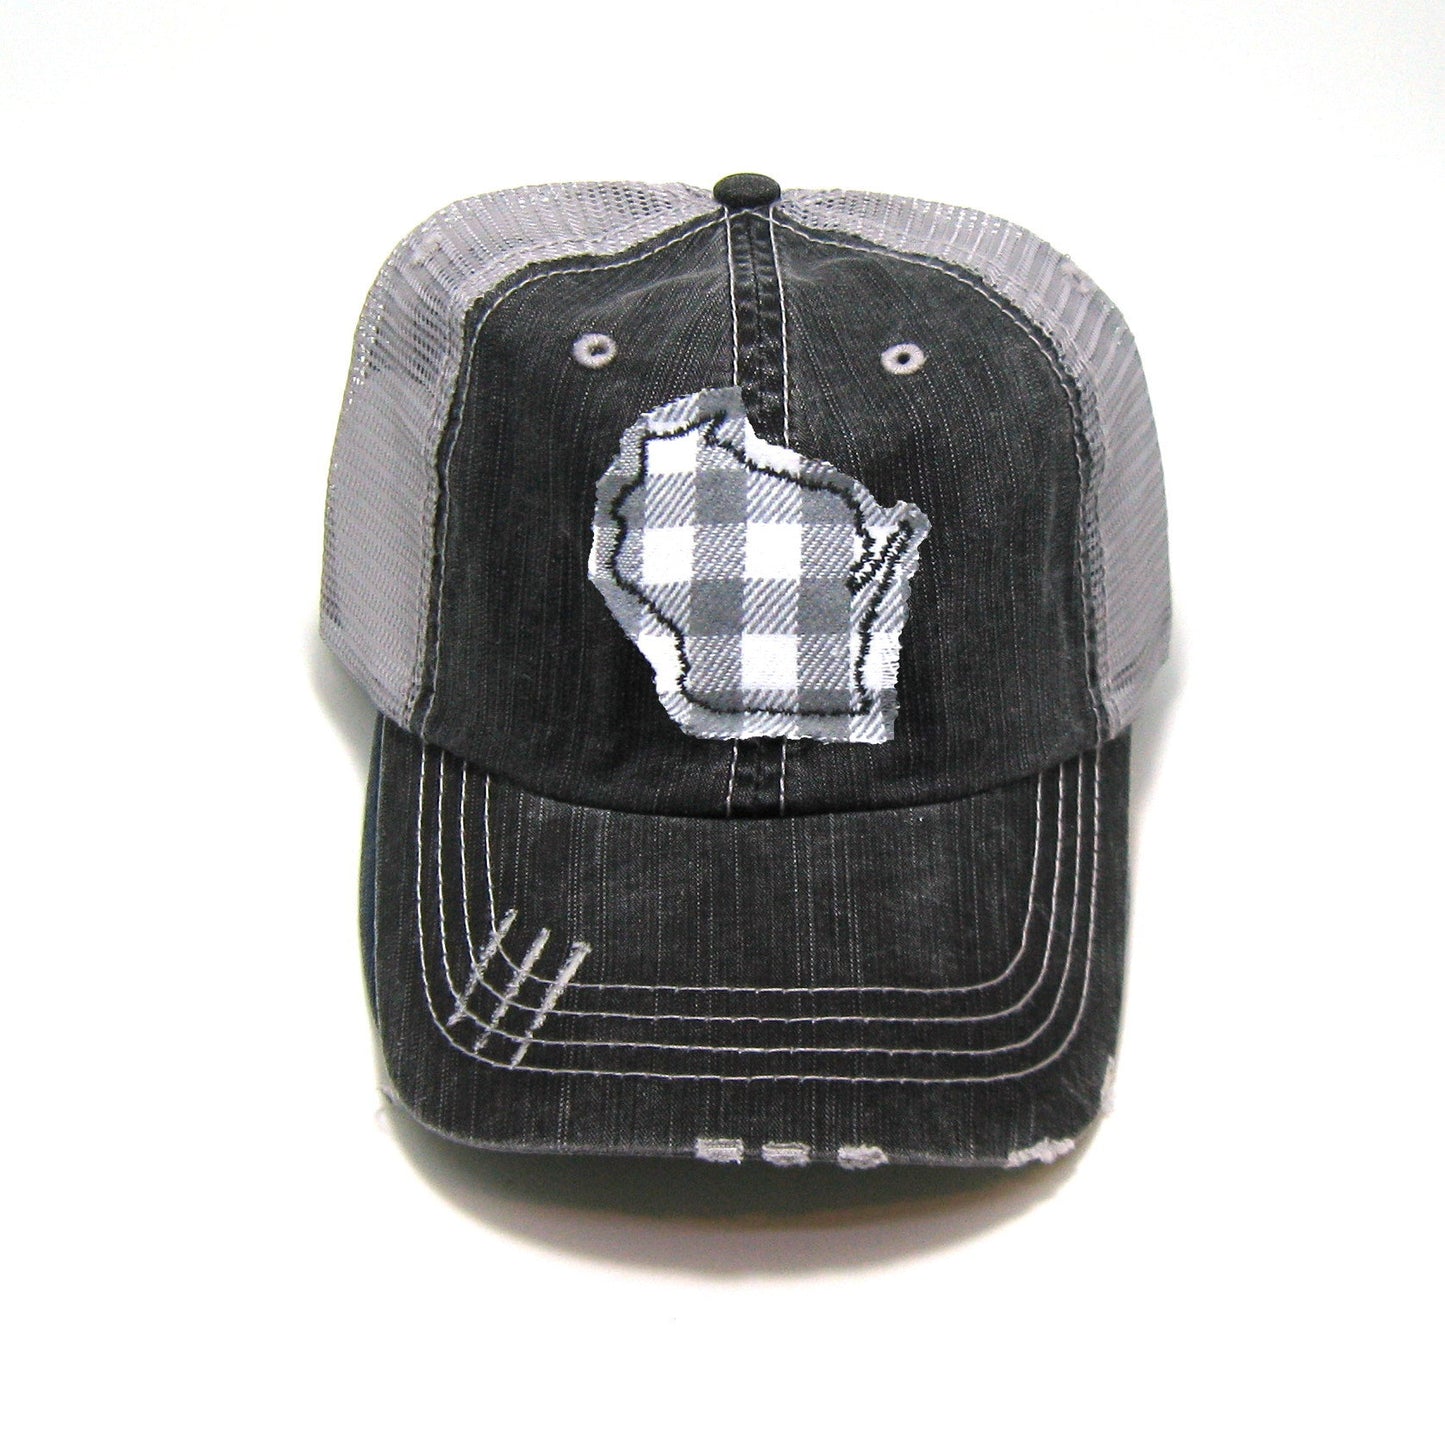 Gray Distressed Trucker Hat - Gray Buffalo Check - All US States